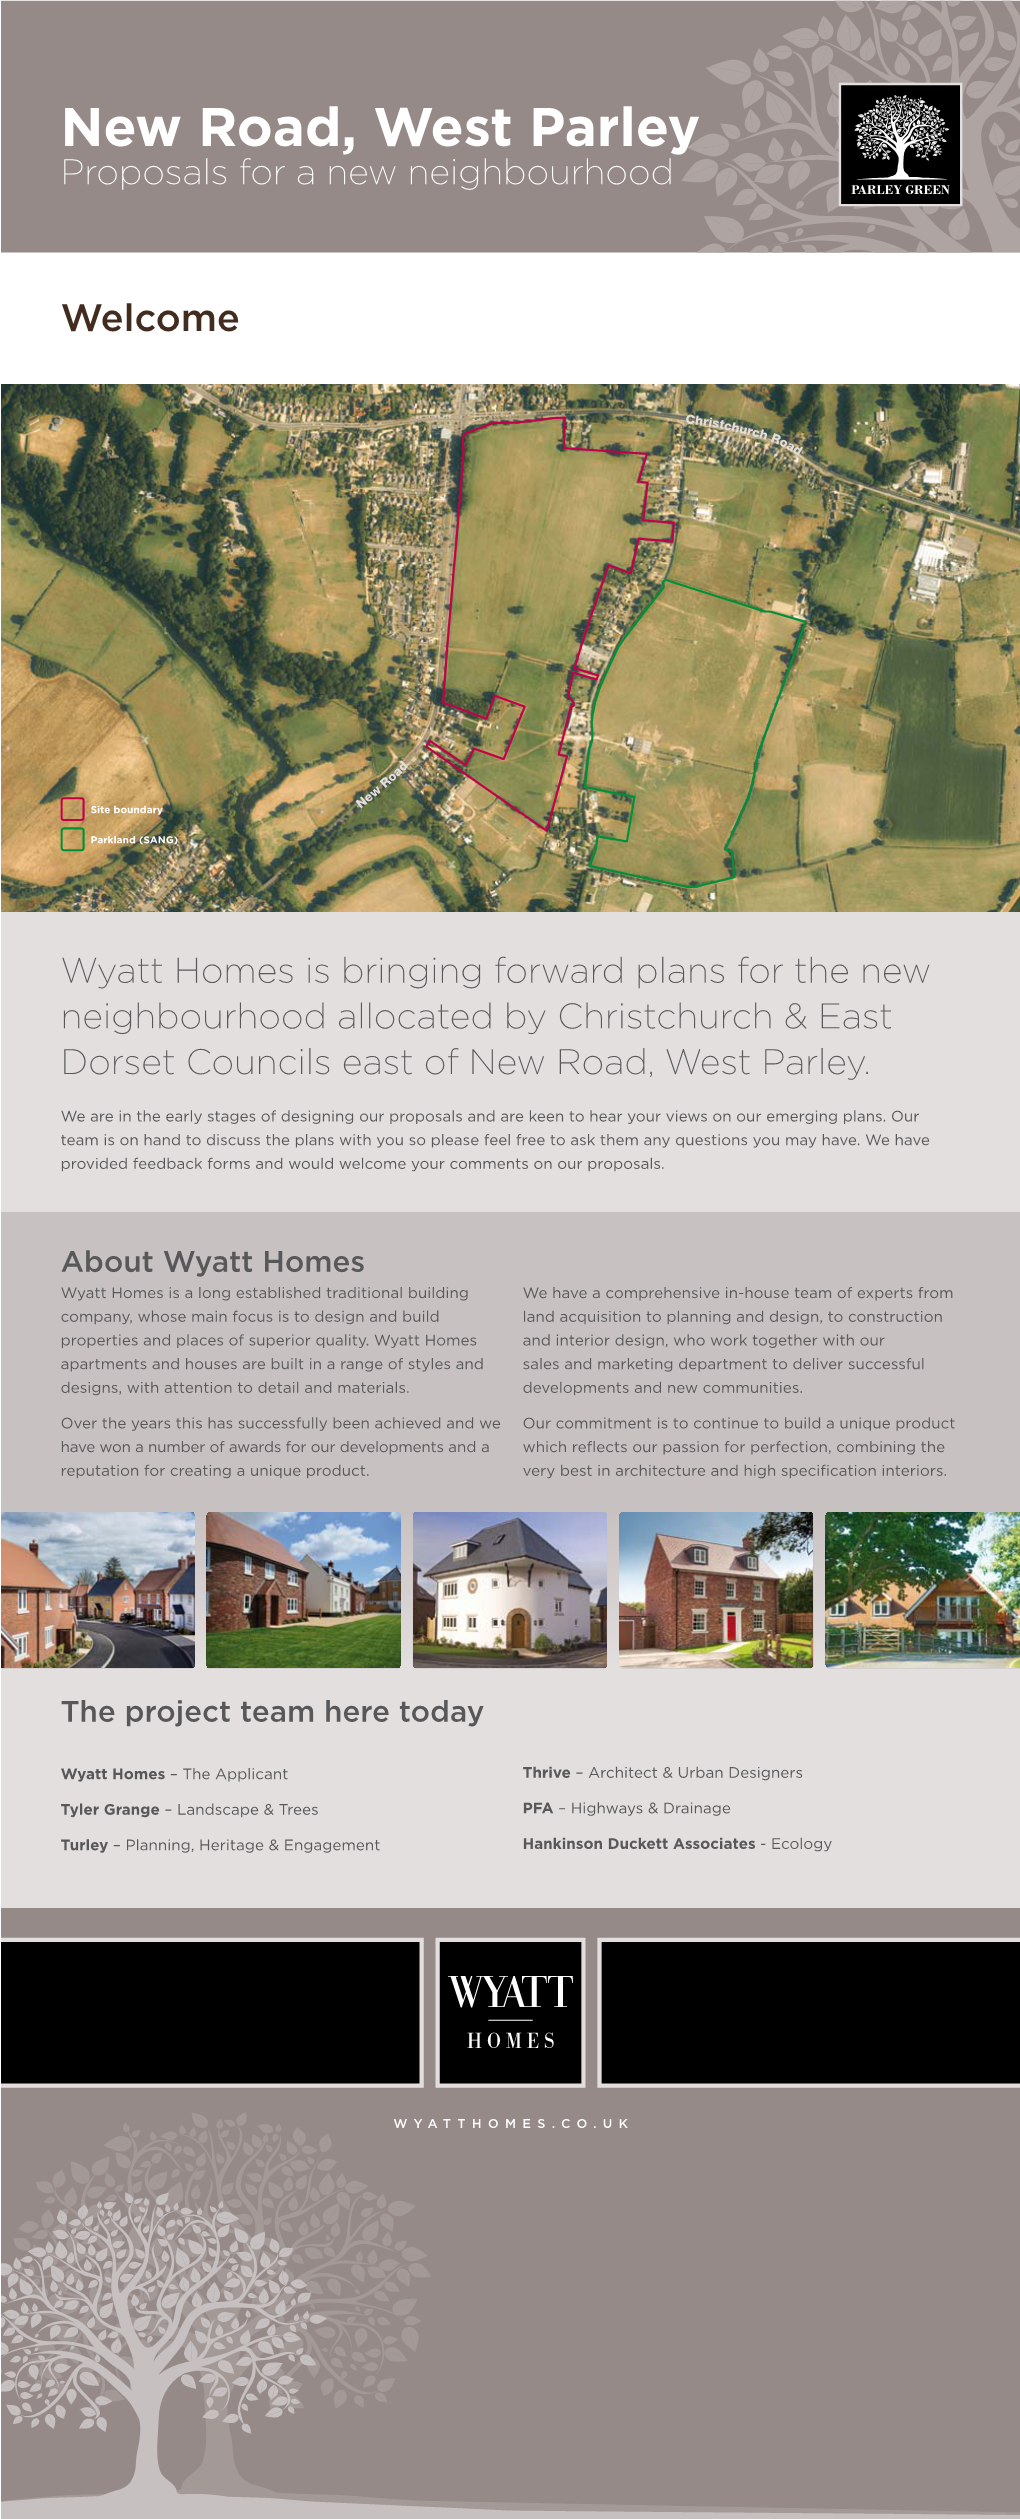 New Road, West Parley Proposals for a New Neighbourhood PARLEY GREEN